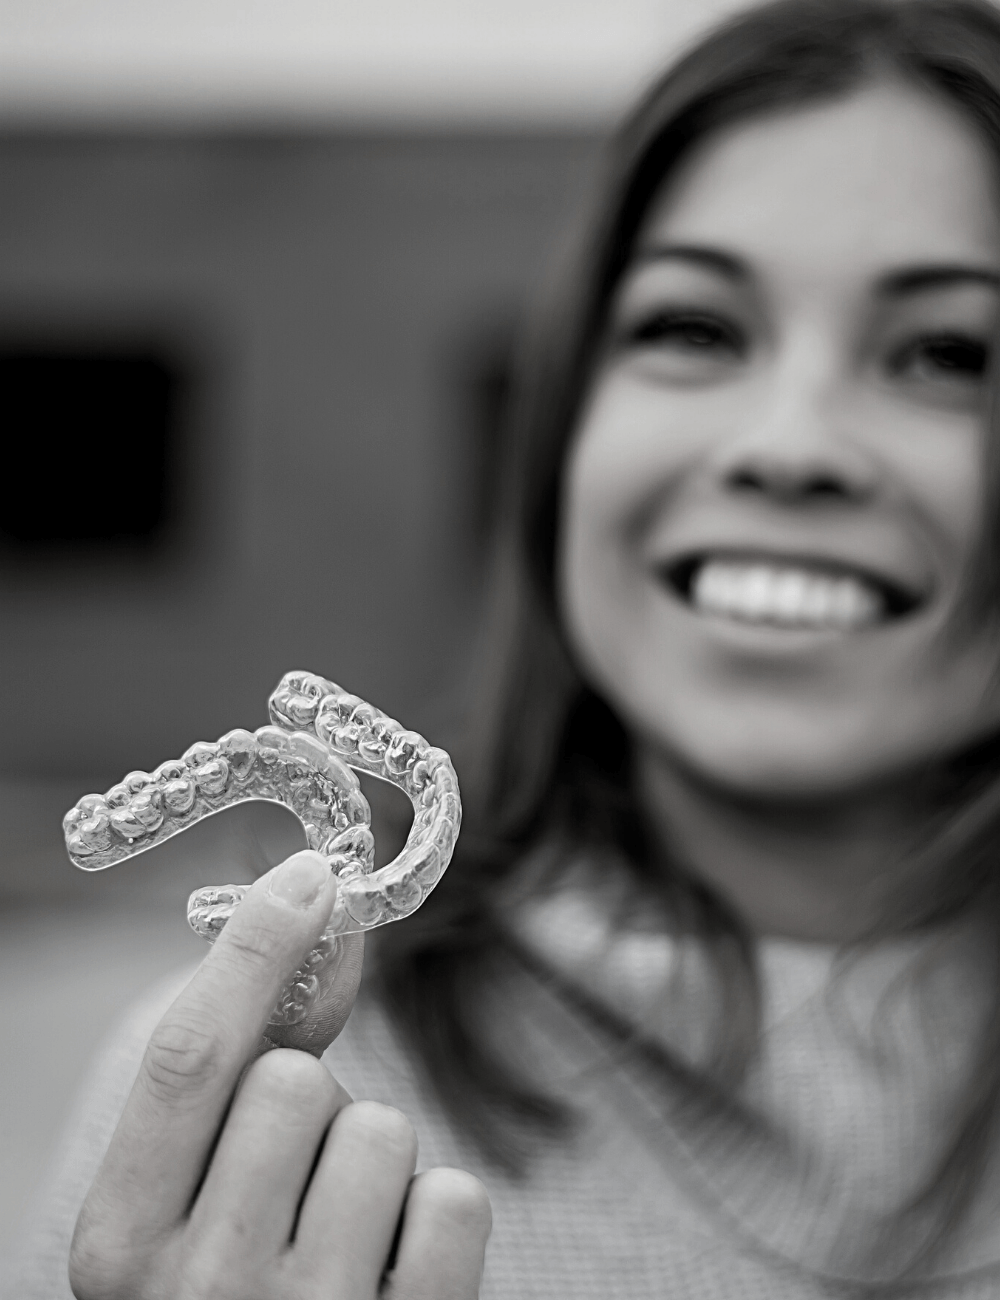 clear aligners therapy